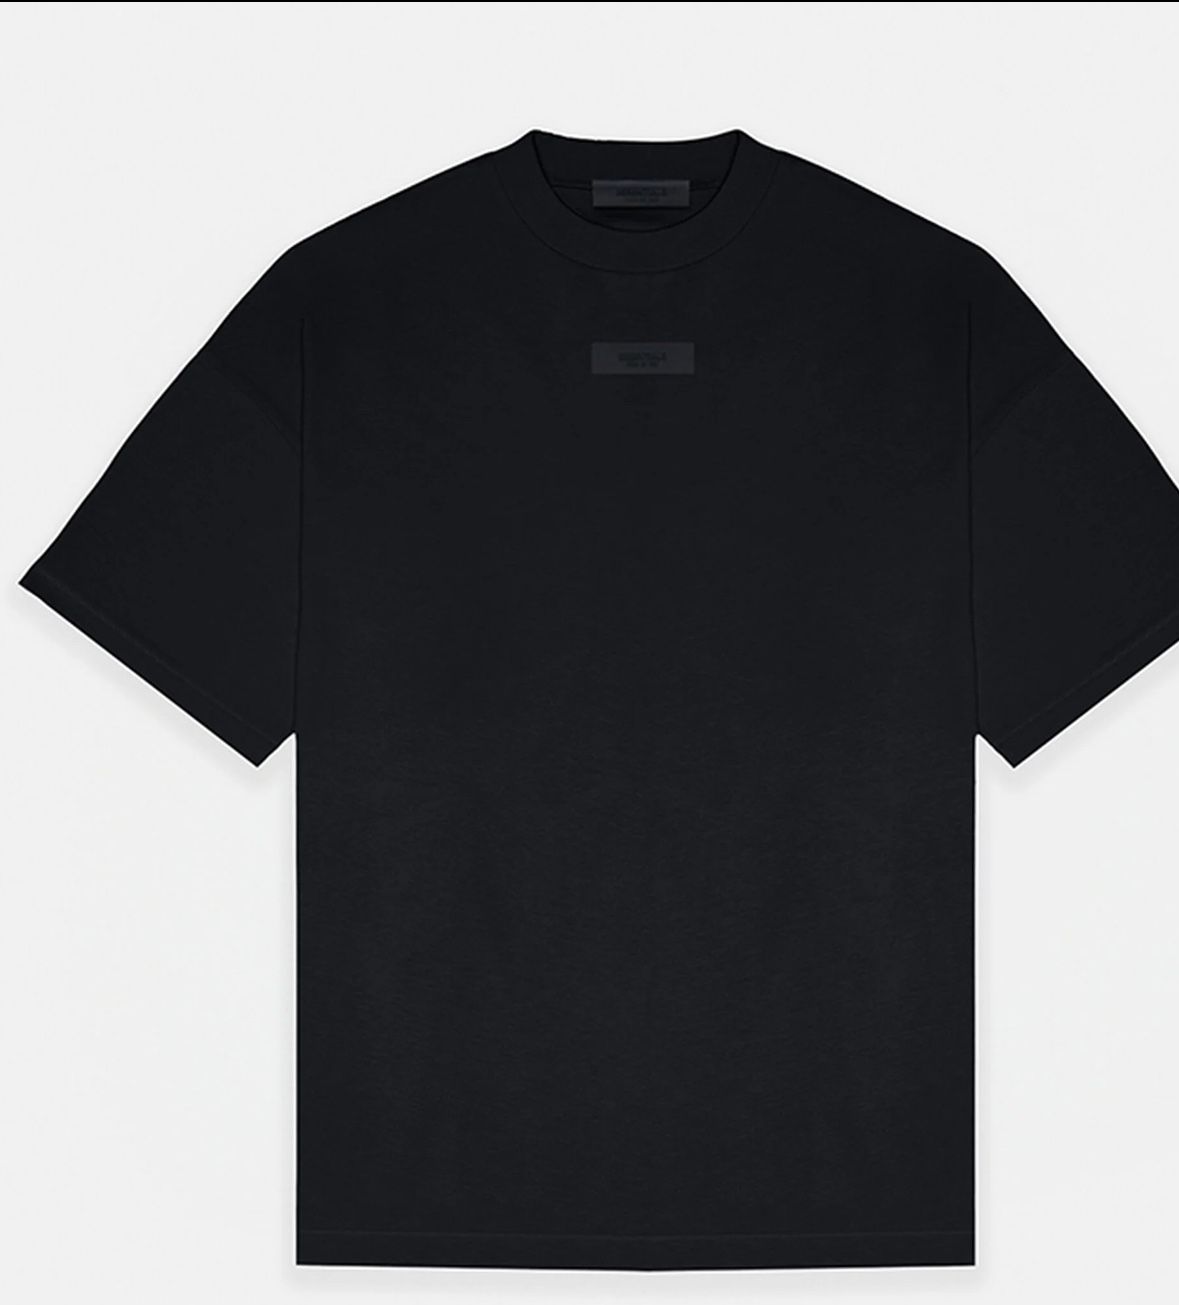 New With Tag Essentials Black T-shirts Size Small